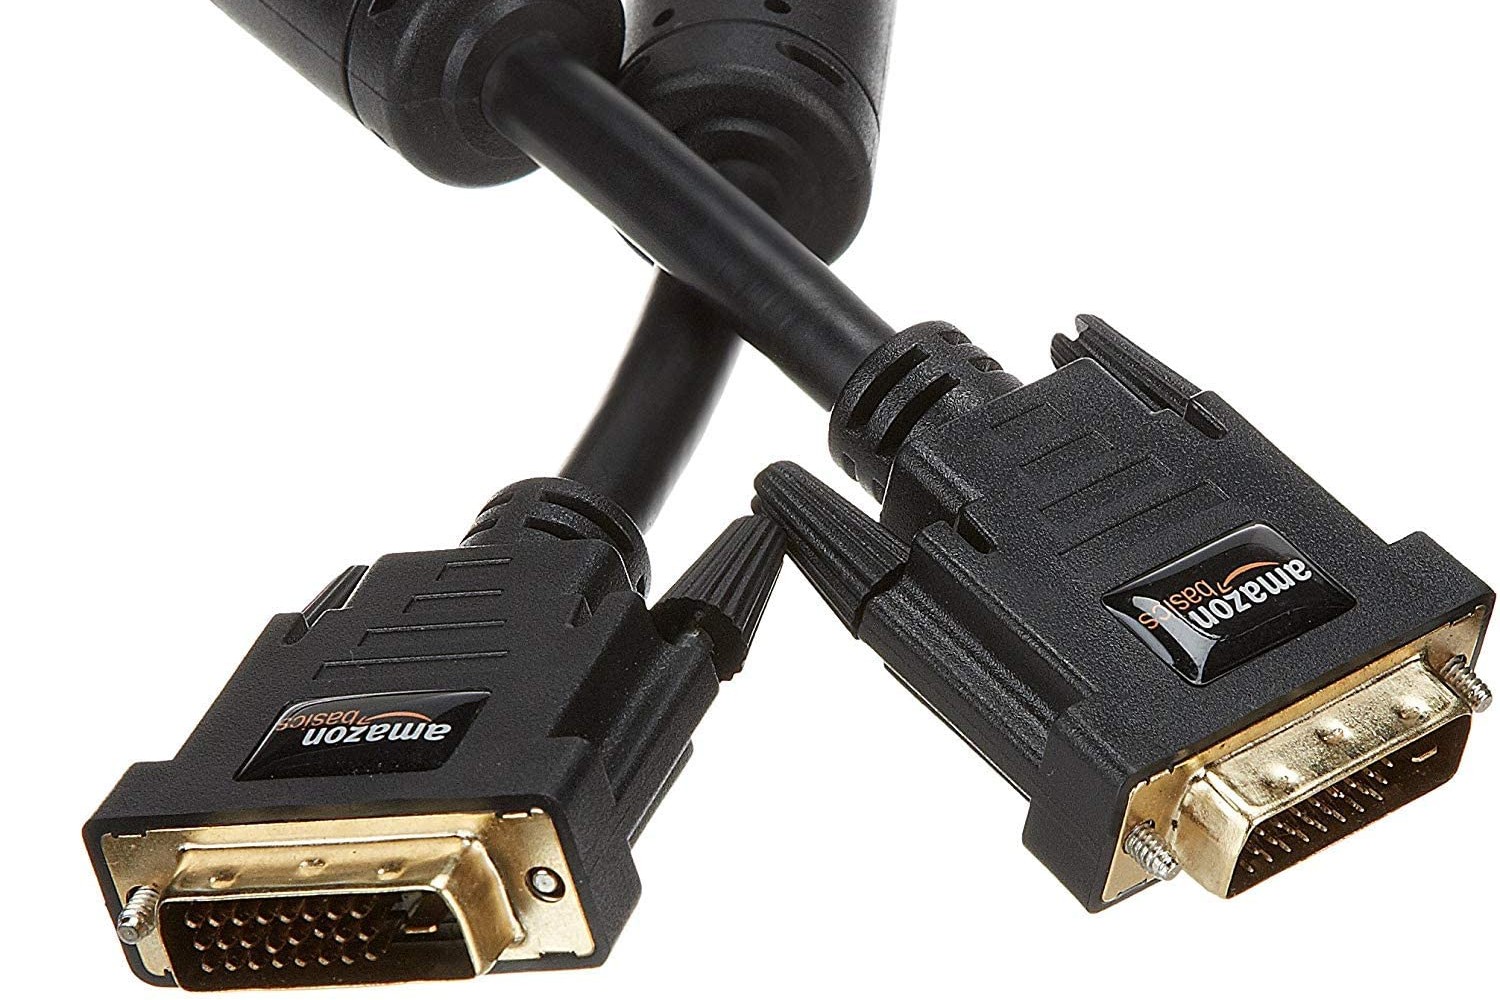 BENFEI DVI to HDMI, Bidirectional DVI (DVI-D) to HDMI Male to Female  Adapter with Gold-Plated Cord 2 Pack